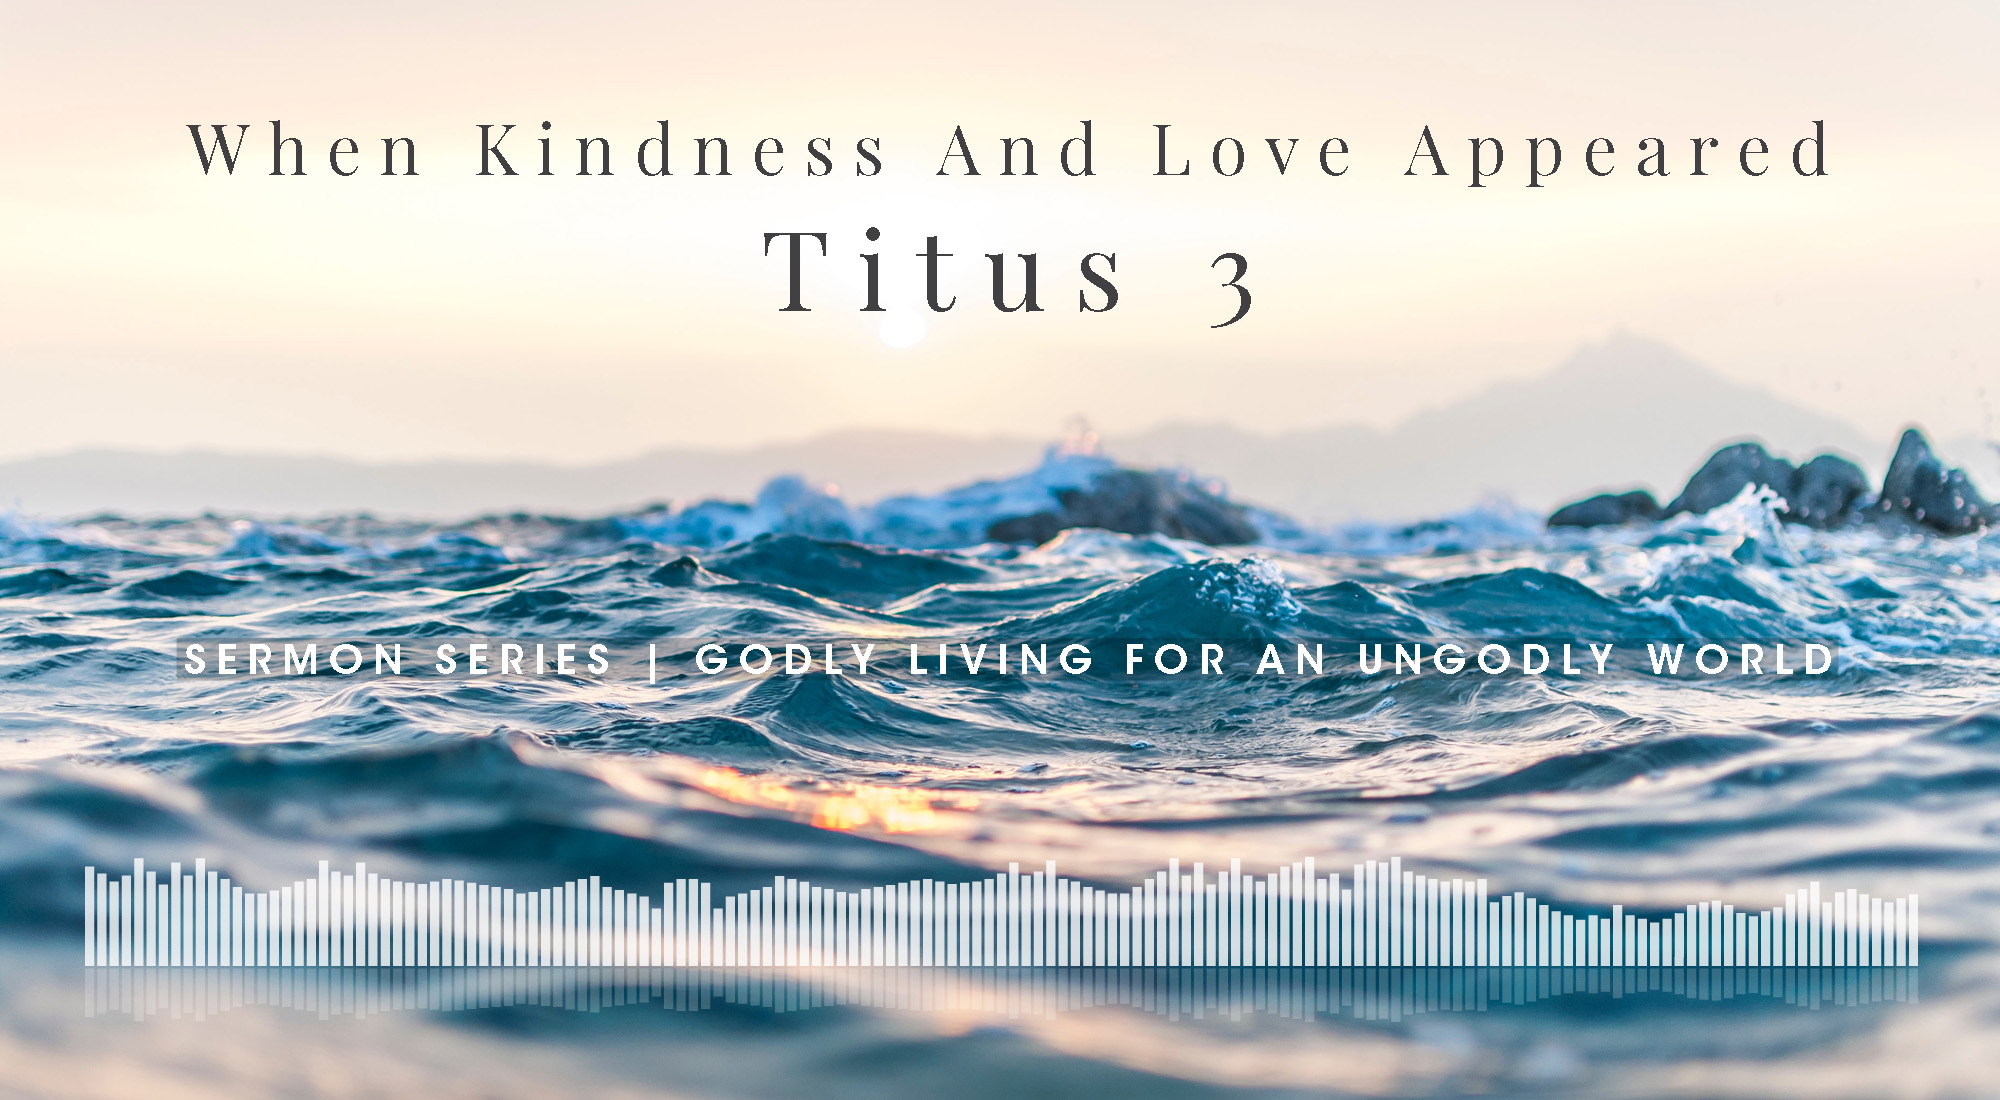 Sermon Series Titus 3, Godly Living In An UnGodly World